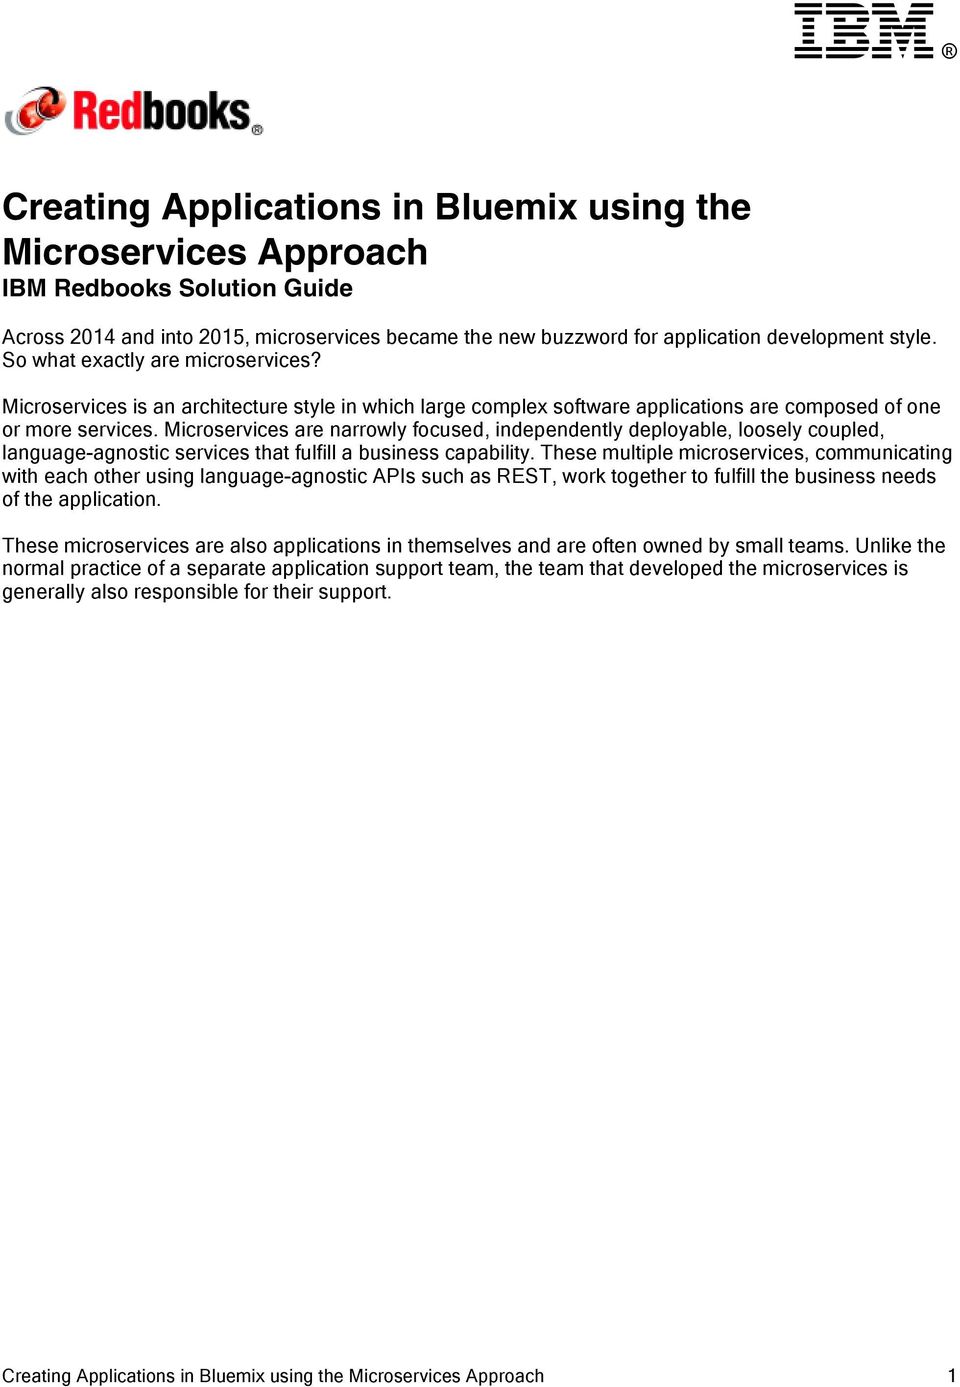 Microservices are narrowly focused, independently deployable, loosely coupled, language-agnostic services that fulfill a business capability.